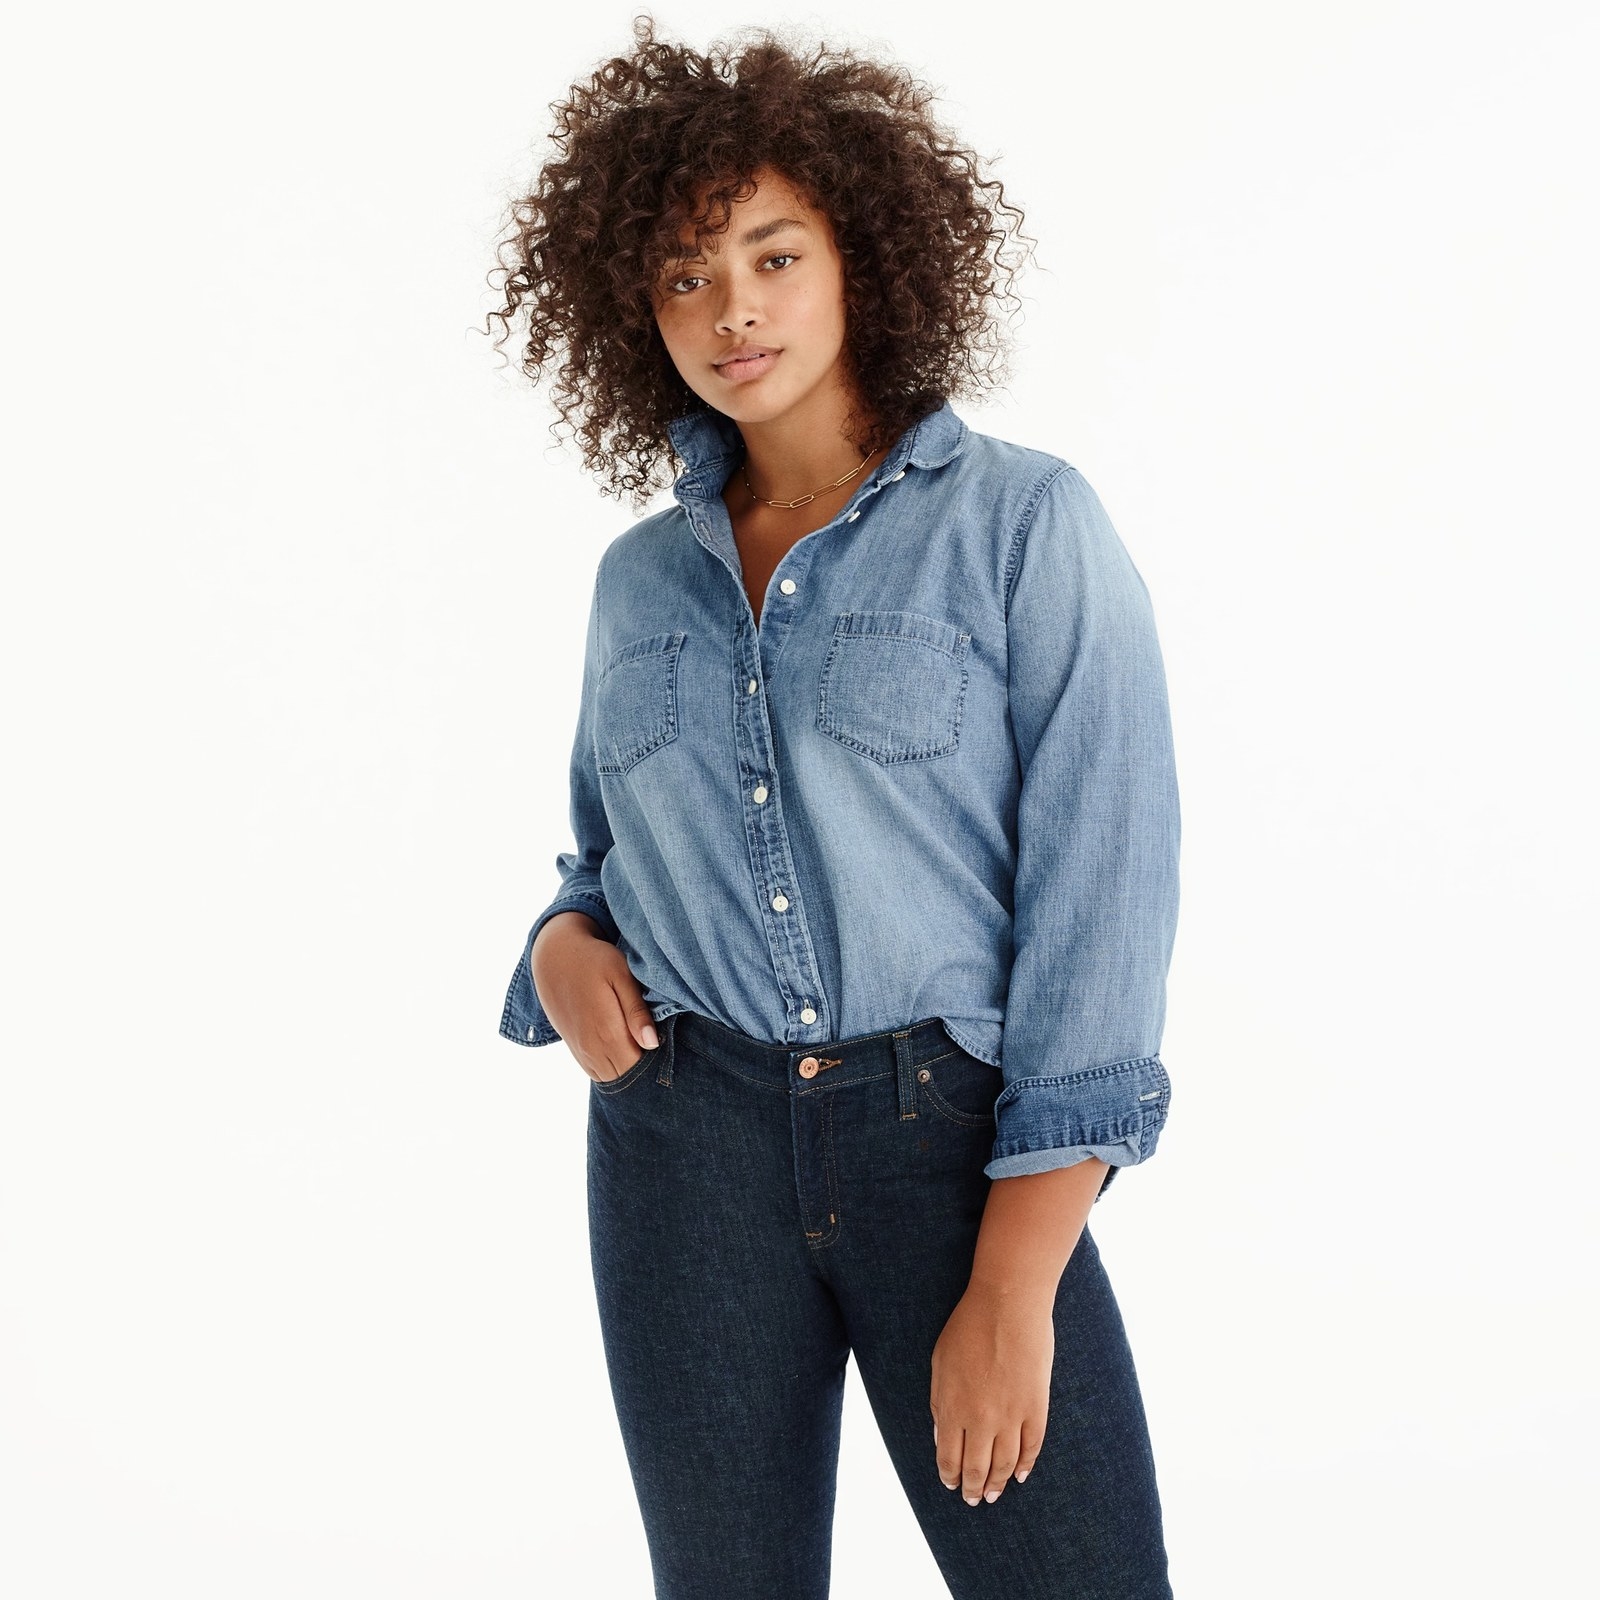 YStyle - The Stradivarius slim mom jeans. Excellent jeans and come